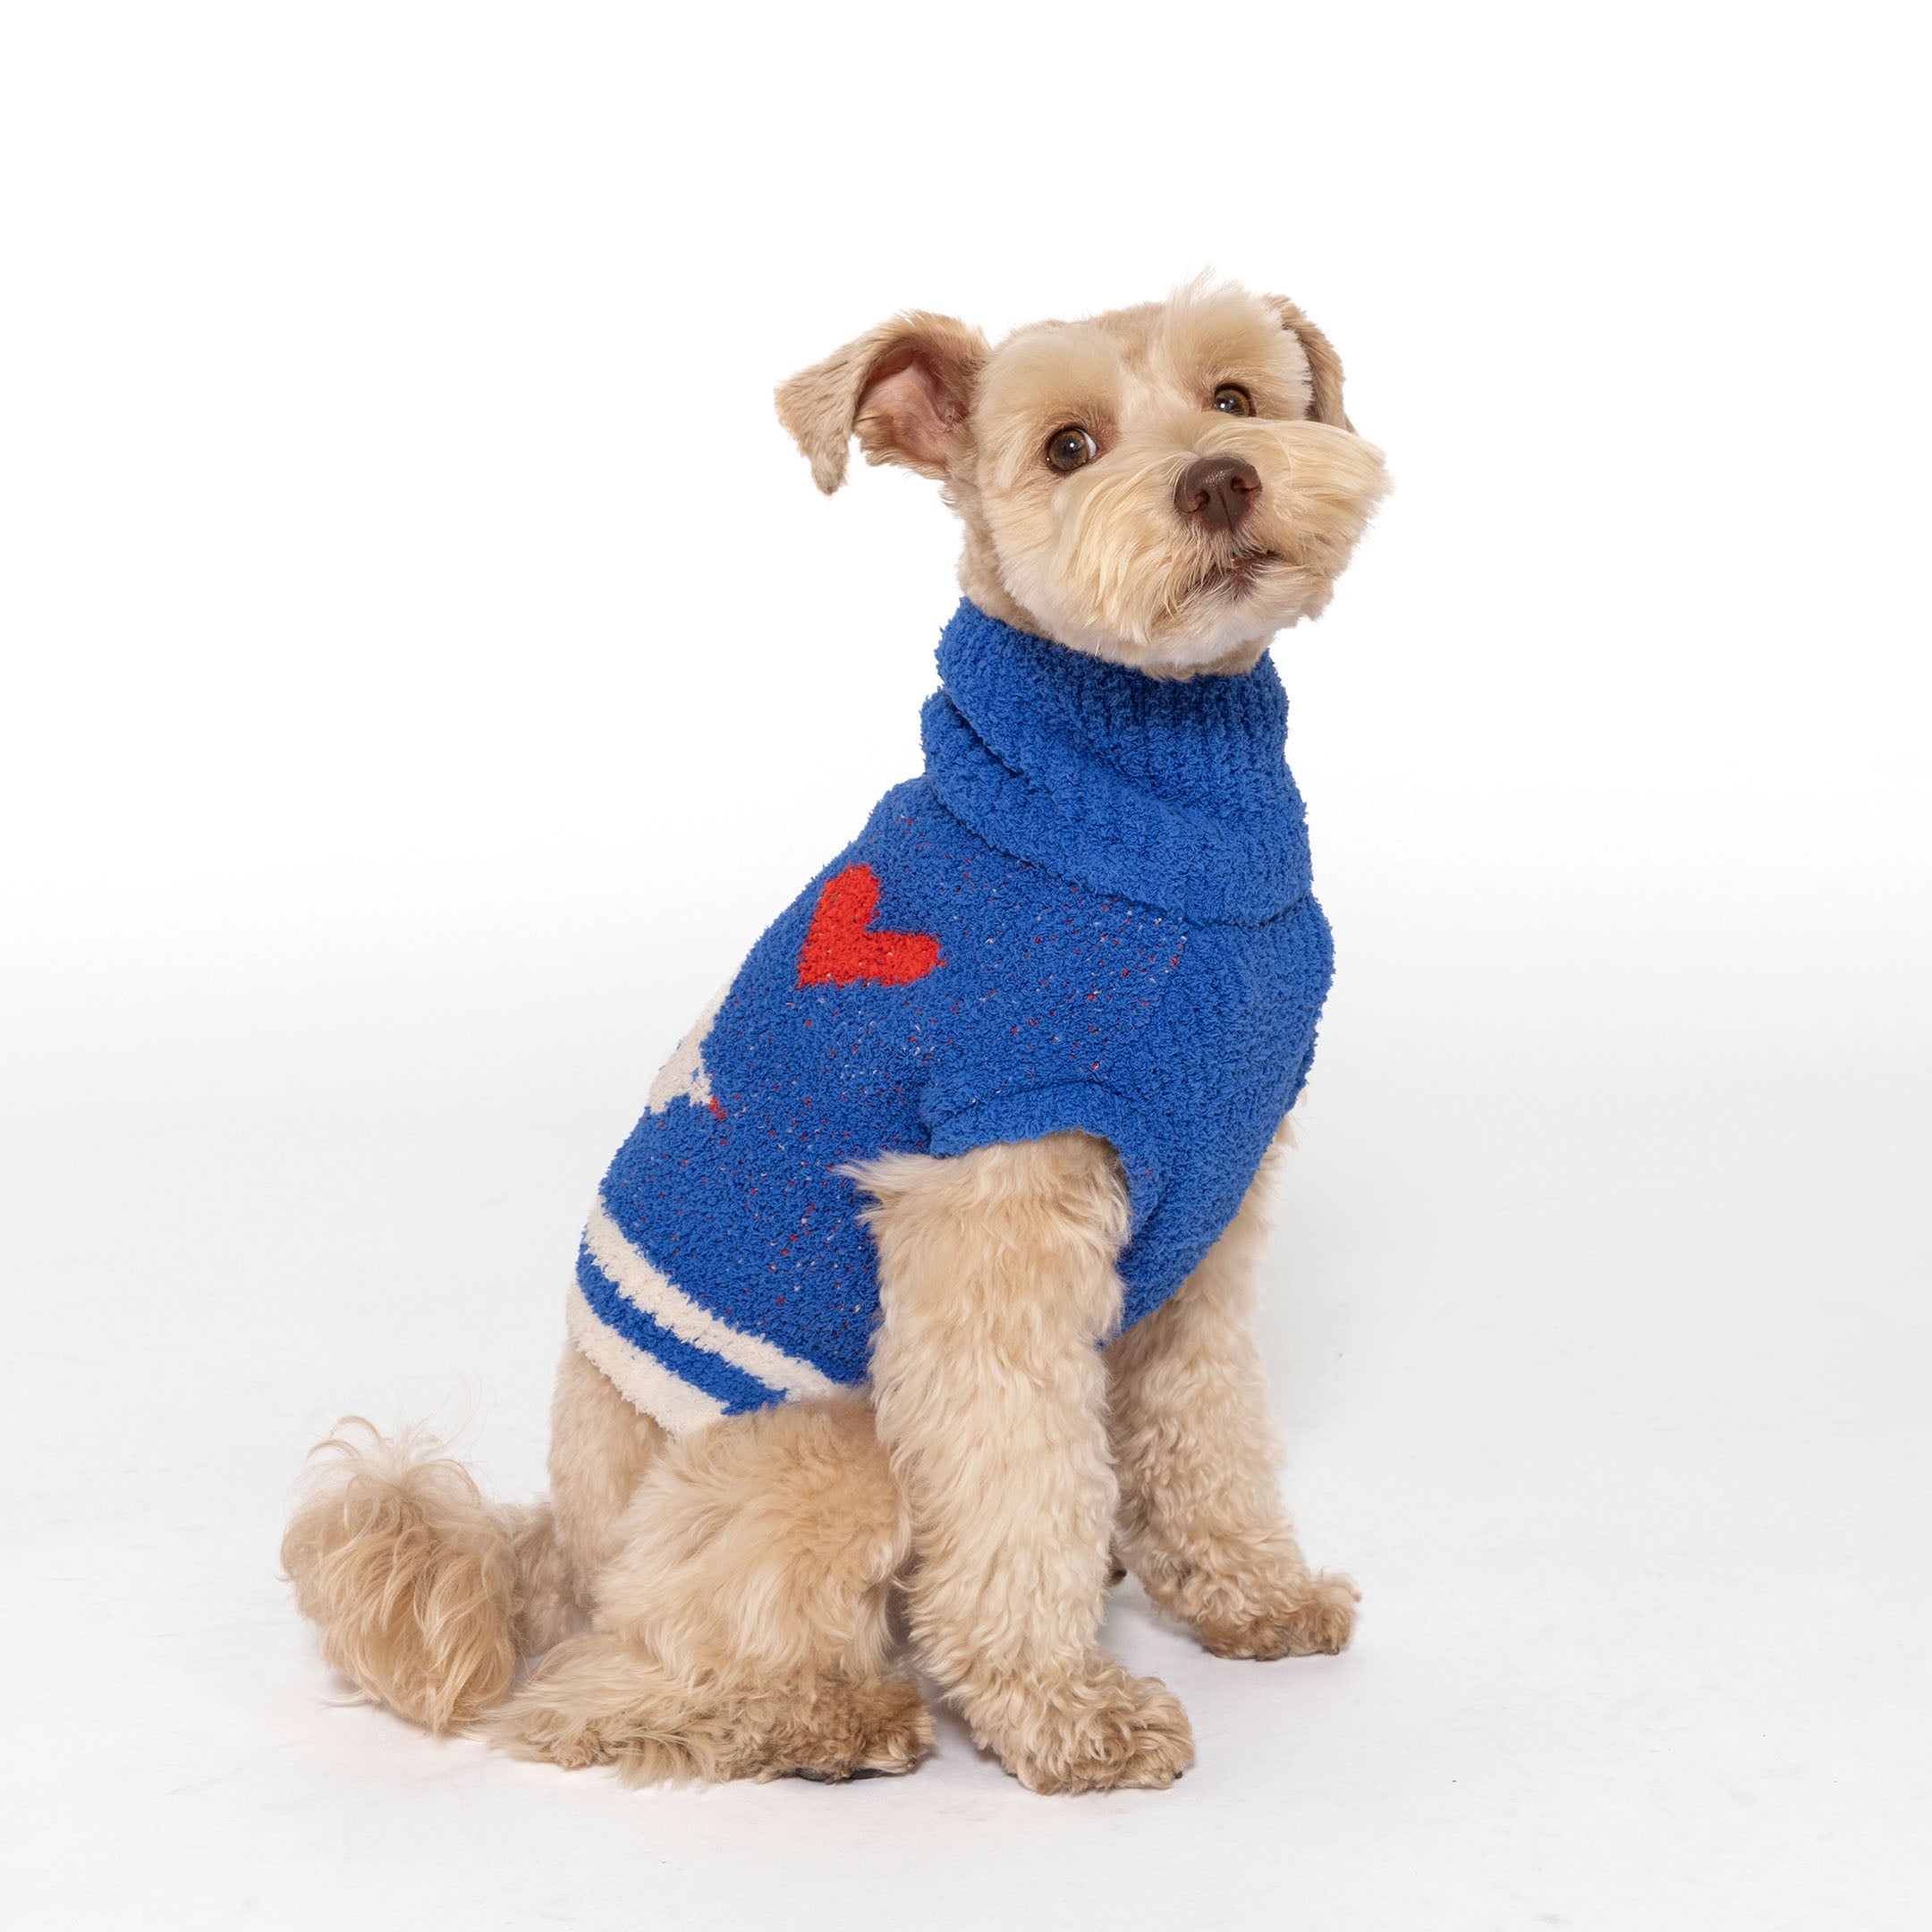 Dog in a blue "The Furryfolks" sweater with a red heart design, looking to the side, on a white background.